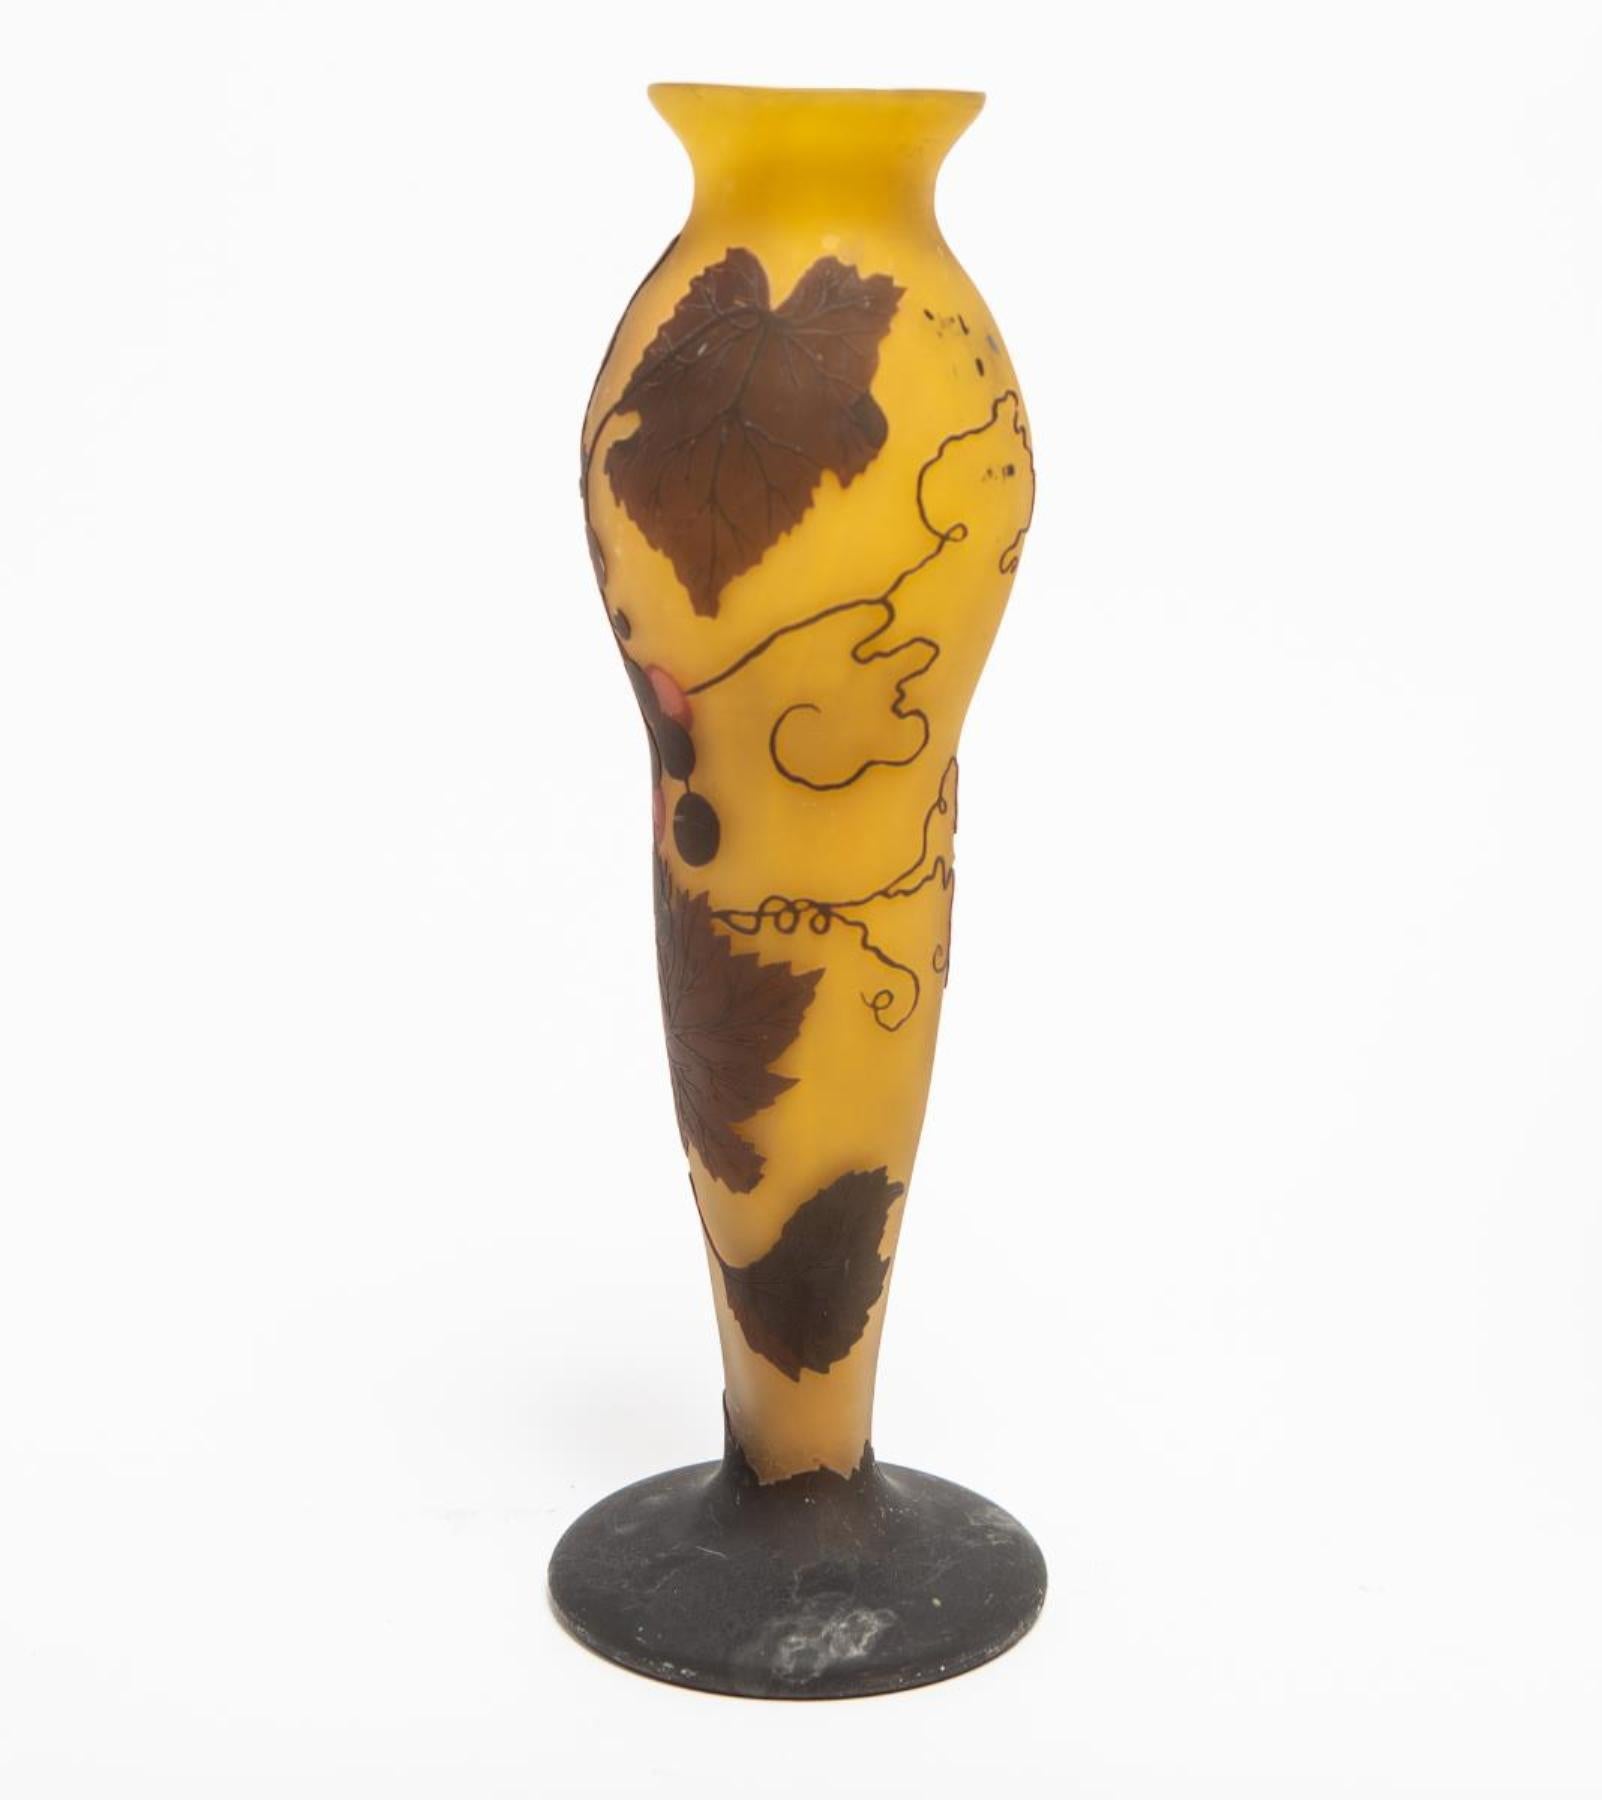 Art Nouveau cameo glass vase in the manner of Emile Galle with purple grape and leaf motifs cut into yellow ground. The piece is signed 'Ansall' in the cameo near the footing and marked 'made in Germany' on the bottom. Some age-appropriate wear.